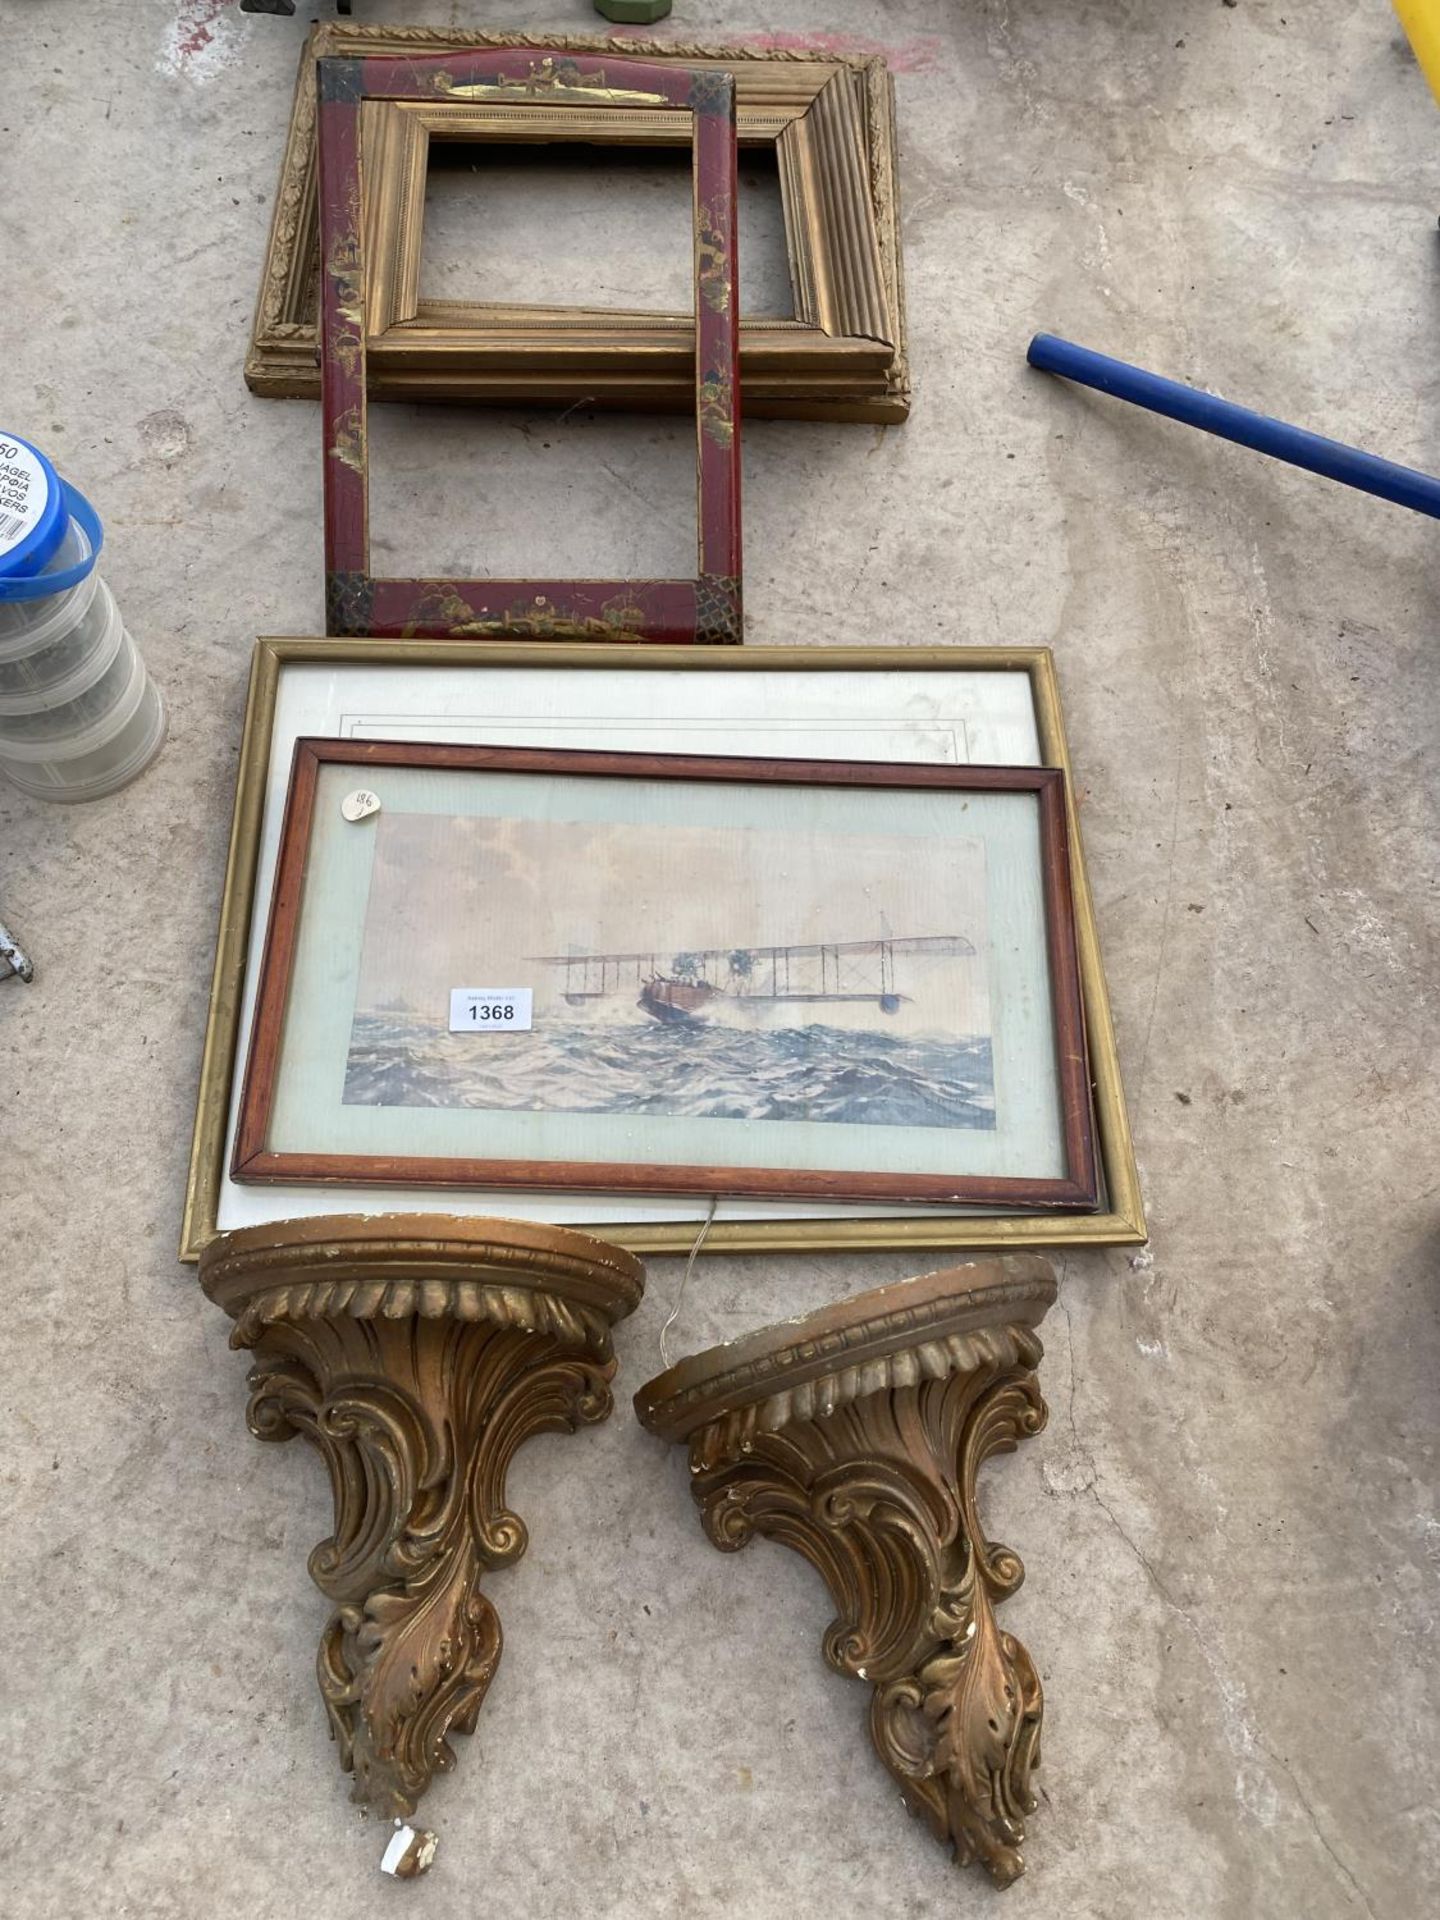 THREE EMPTY PICTURE FRAMES, TWO FRAMED PRINTS AND A PAIR OF WALL HANGINGS